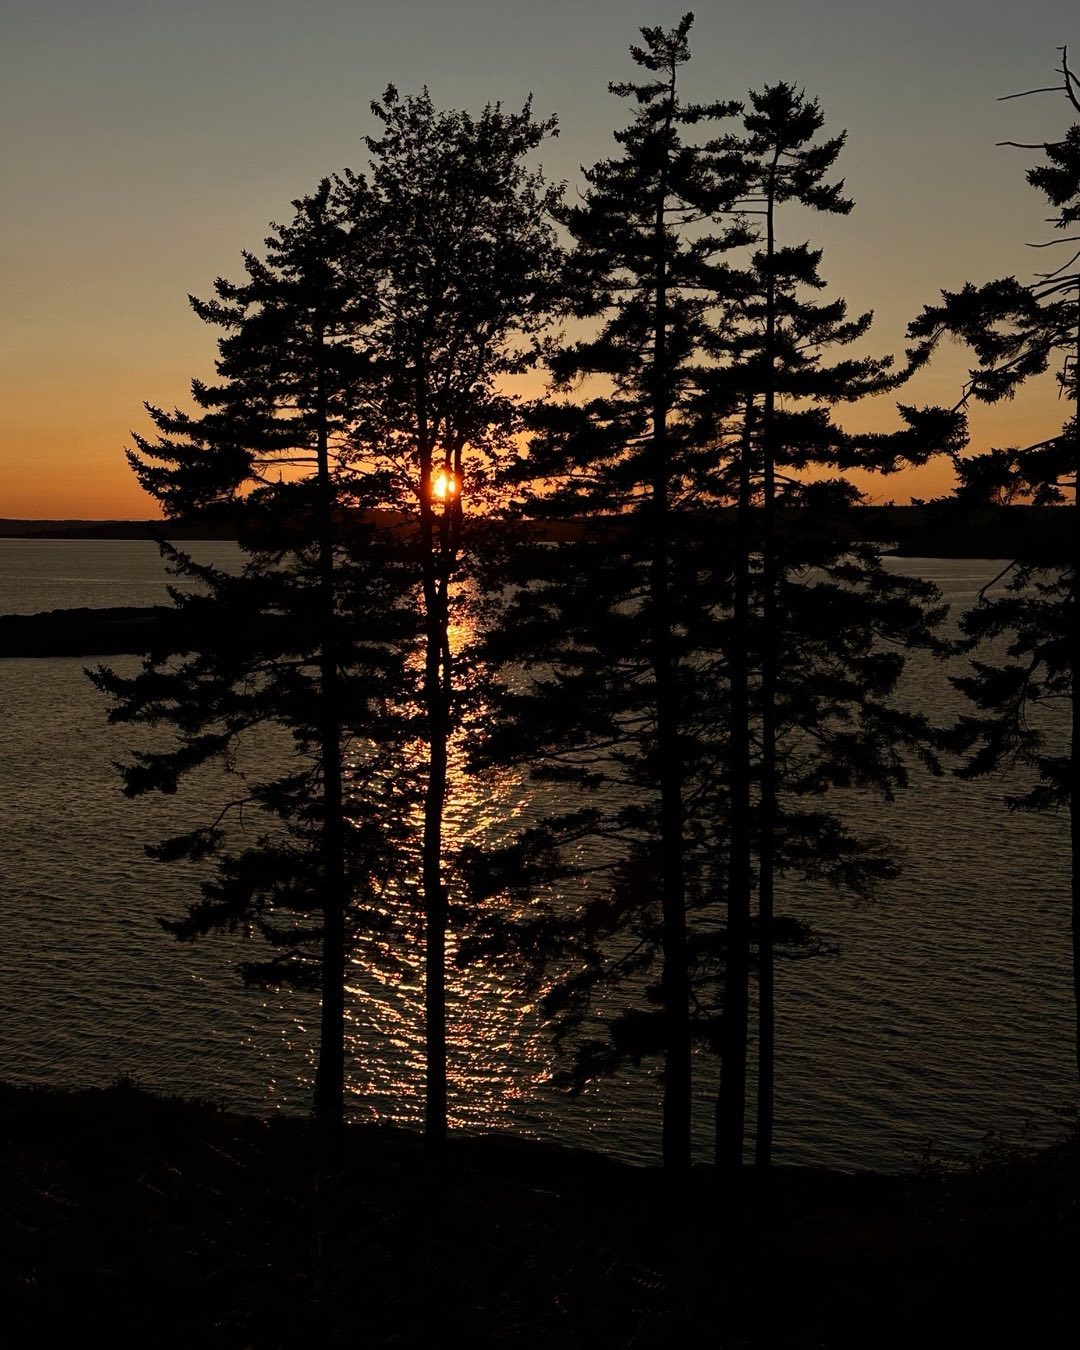 Sunset on Mt Desert Island near Acadia National Park last weekend. Beautiful weather and good company. We biked the Carriage Trails several times. #acadianationalpark #mtdesertisland #sunsetinmaine #carriagetrails